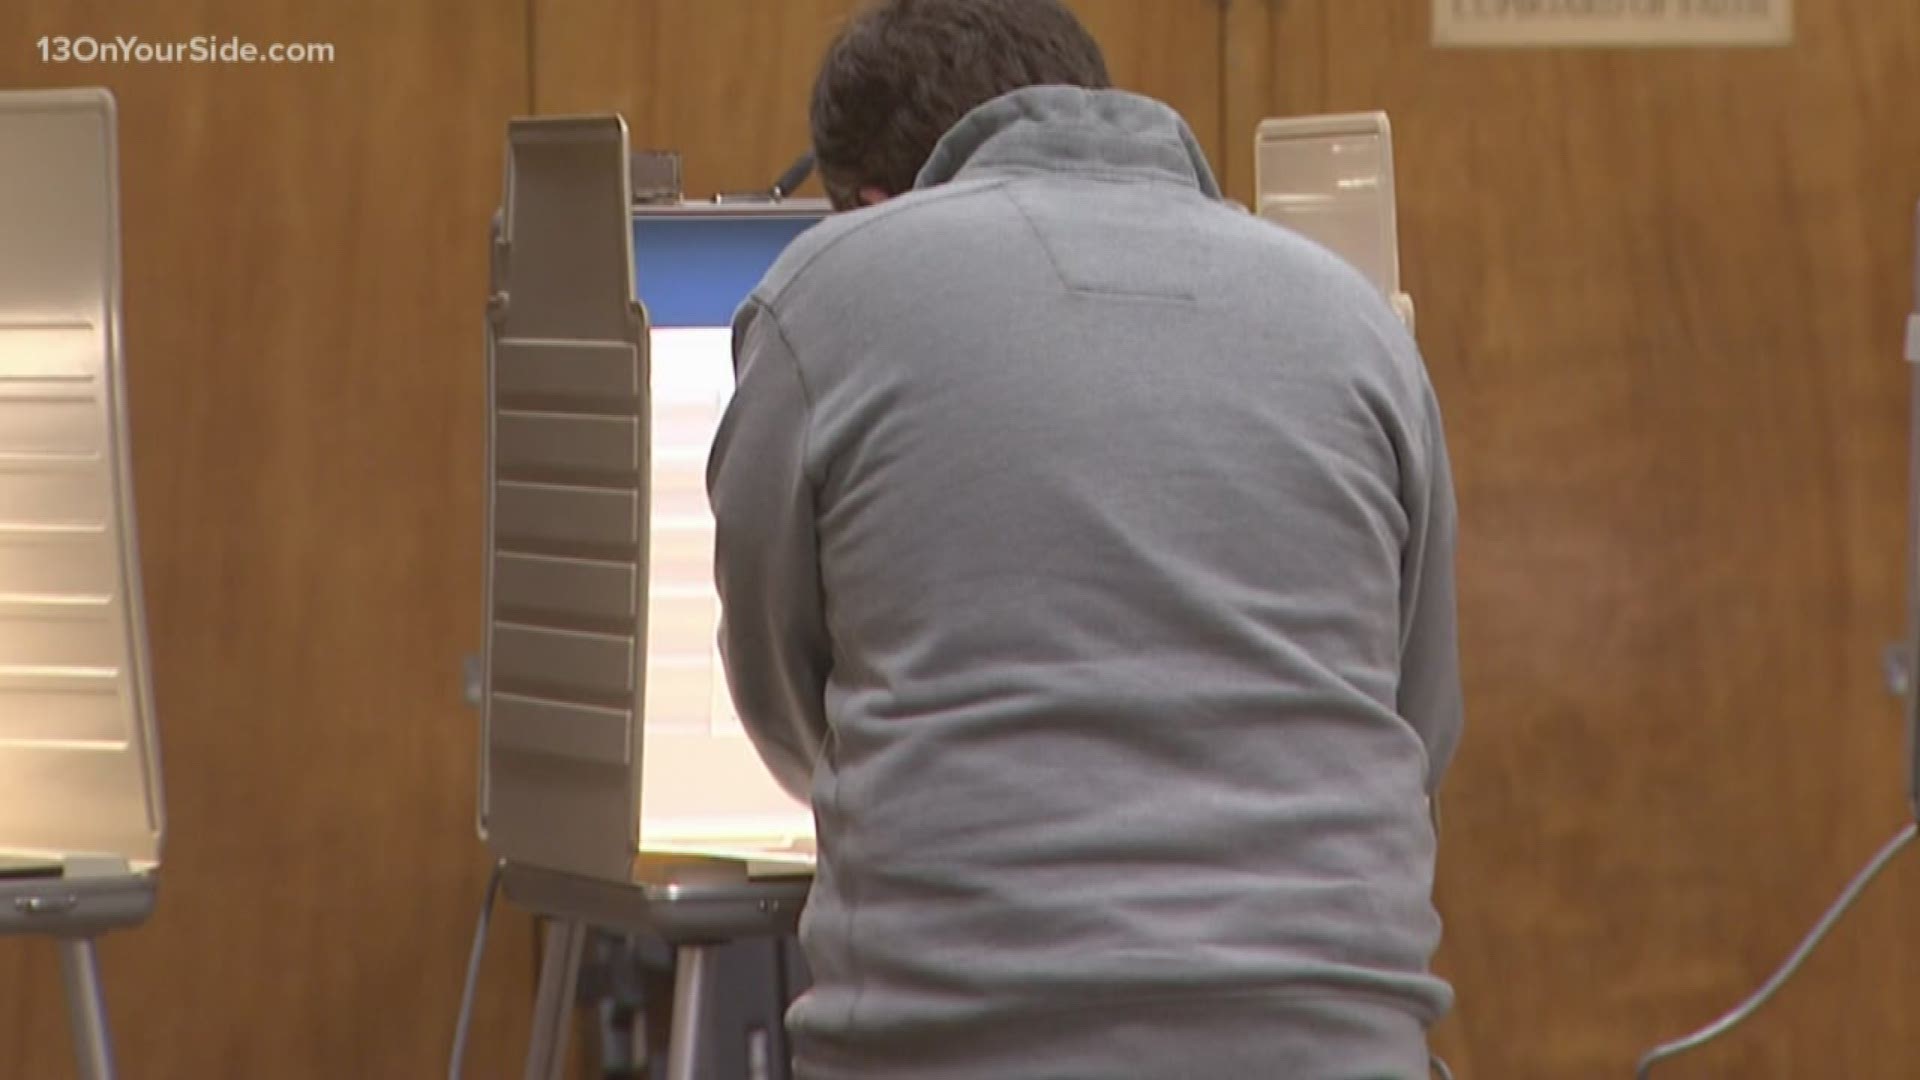 13 ON YOUR SIDE's Angela Cunningham was live at the polls Tuesday with a look at what you need to know for the primary.